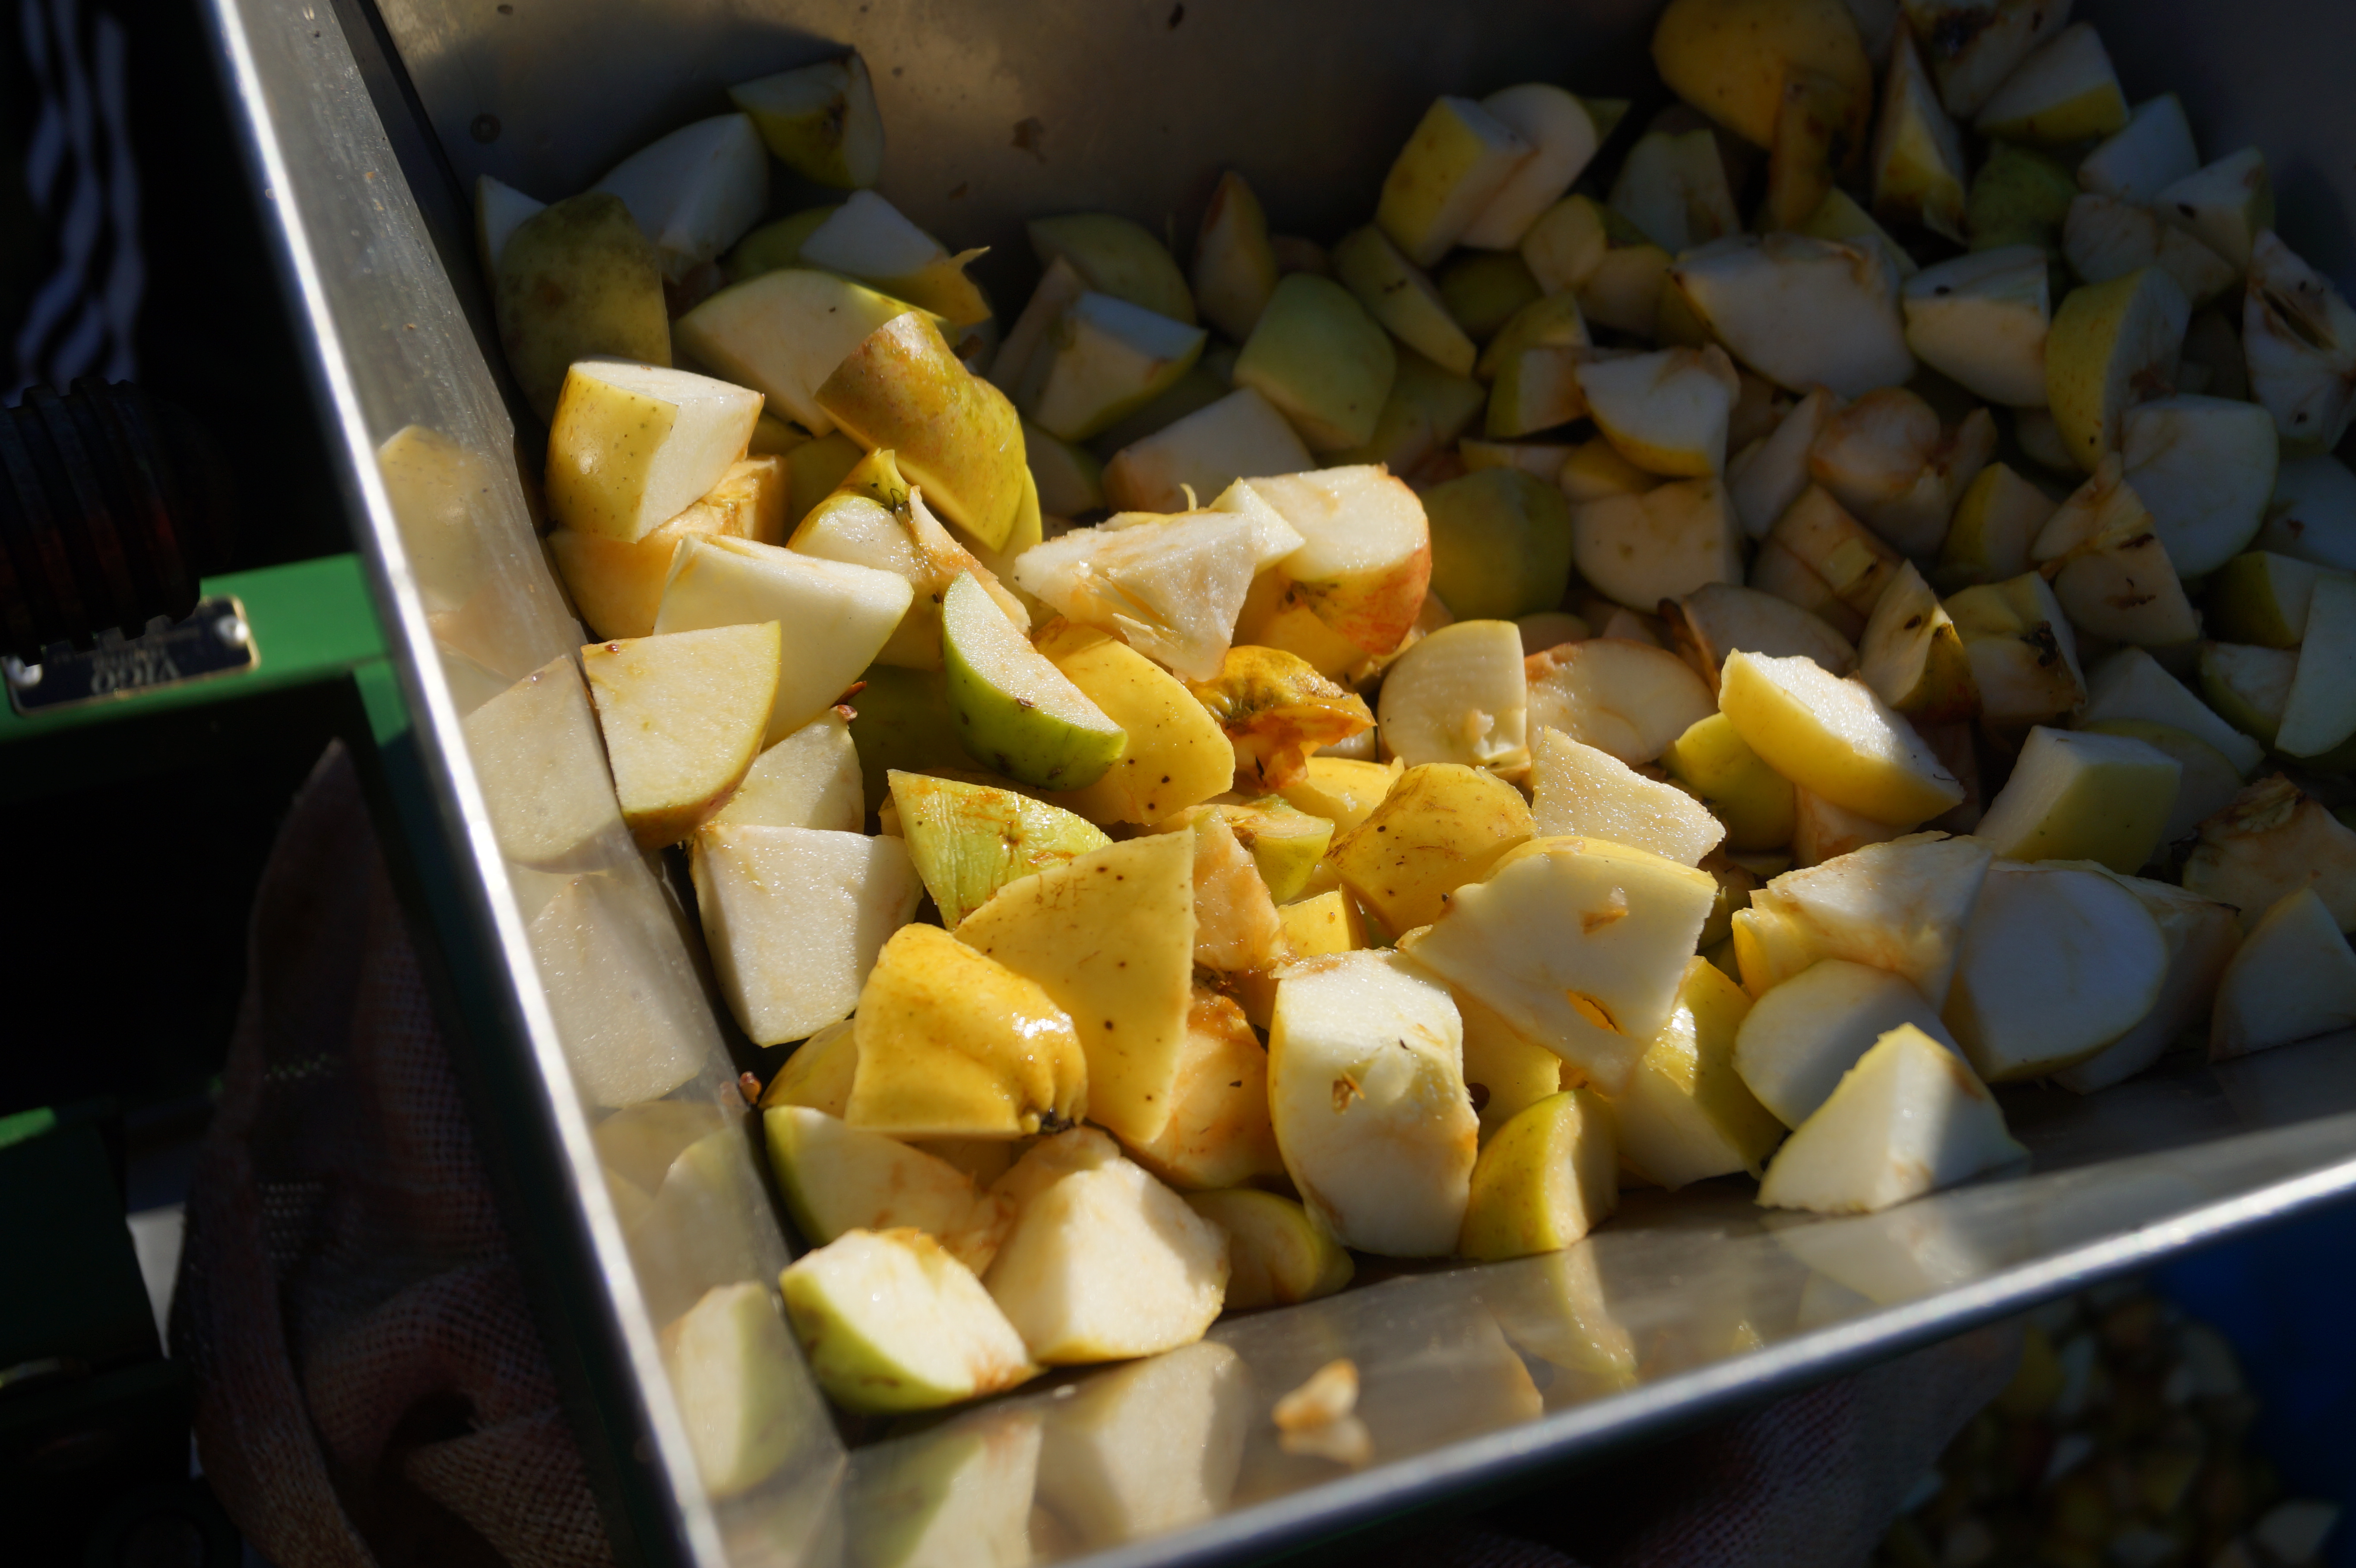 chopped up apples in the crusher